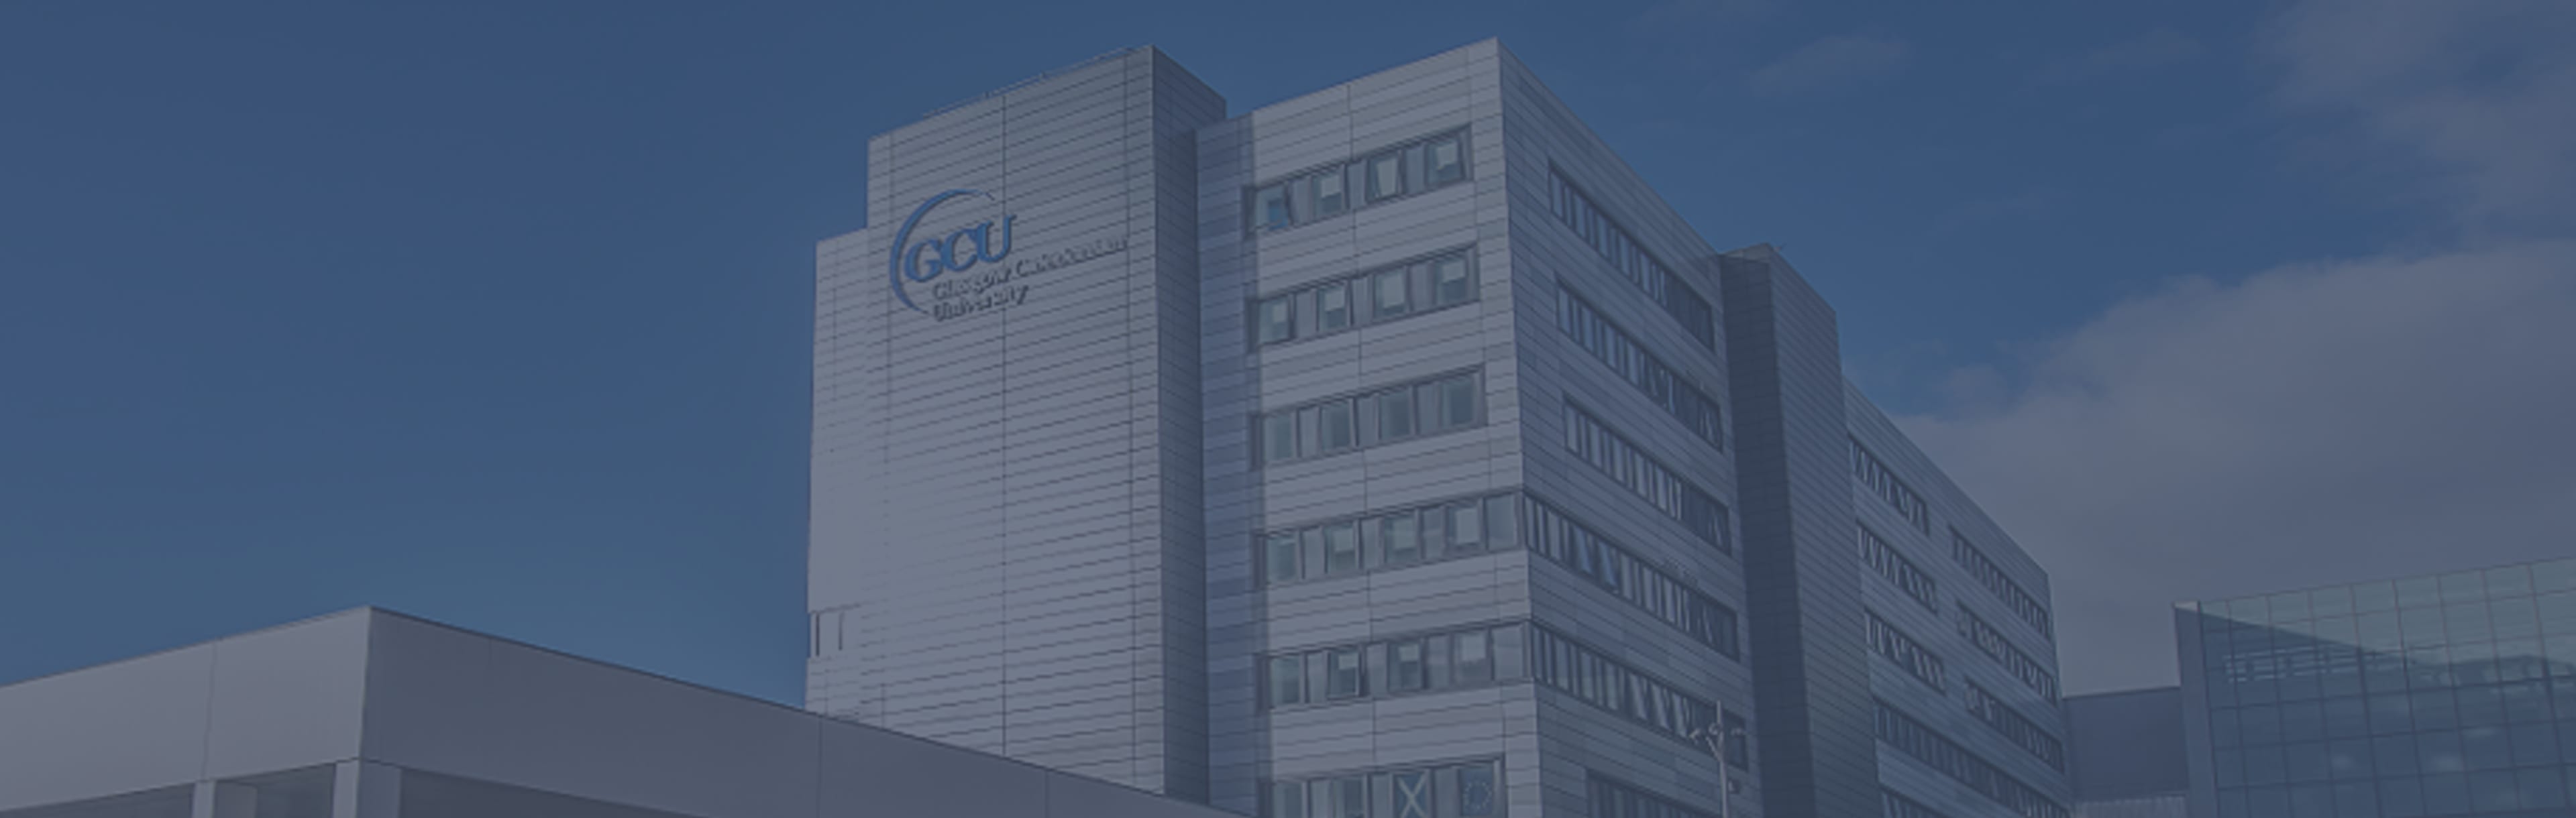 Glasgow Caledonian University - The School of Health and Life Sciences BSc (Hons) in Orthoptics